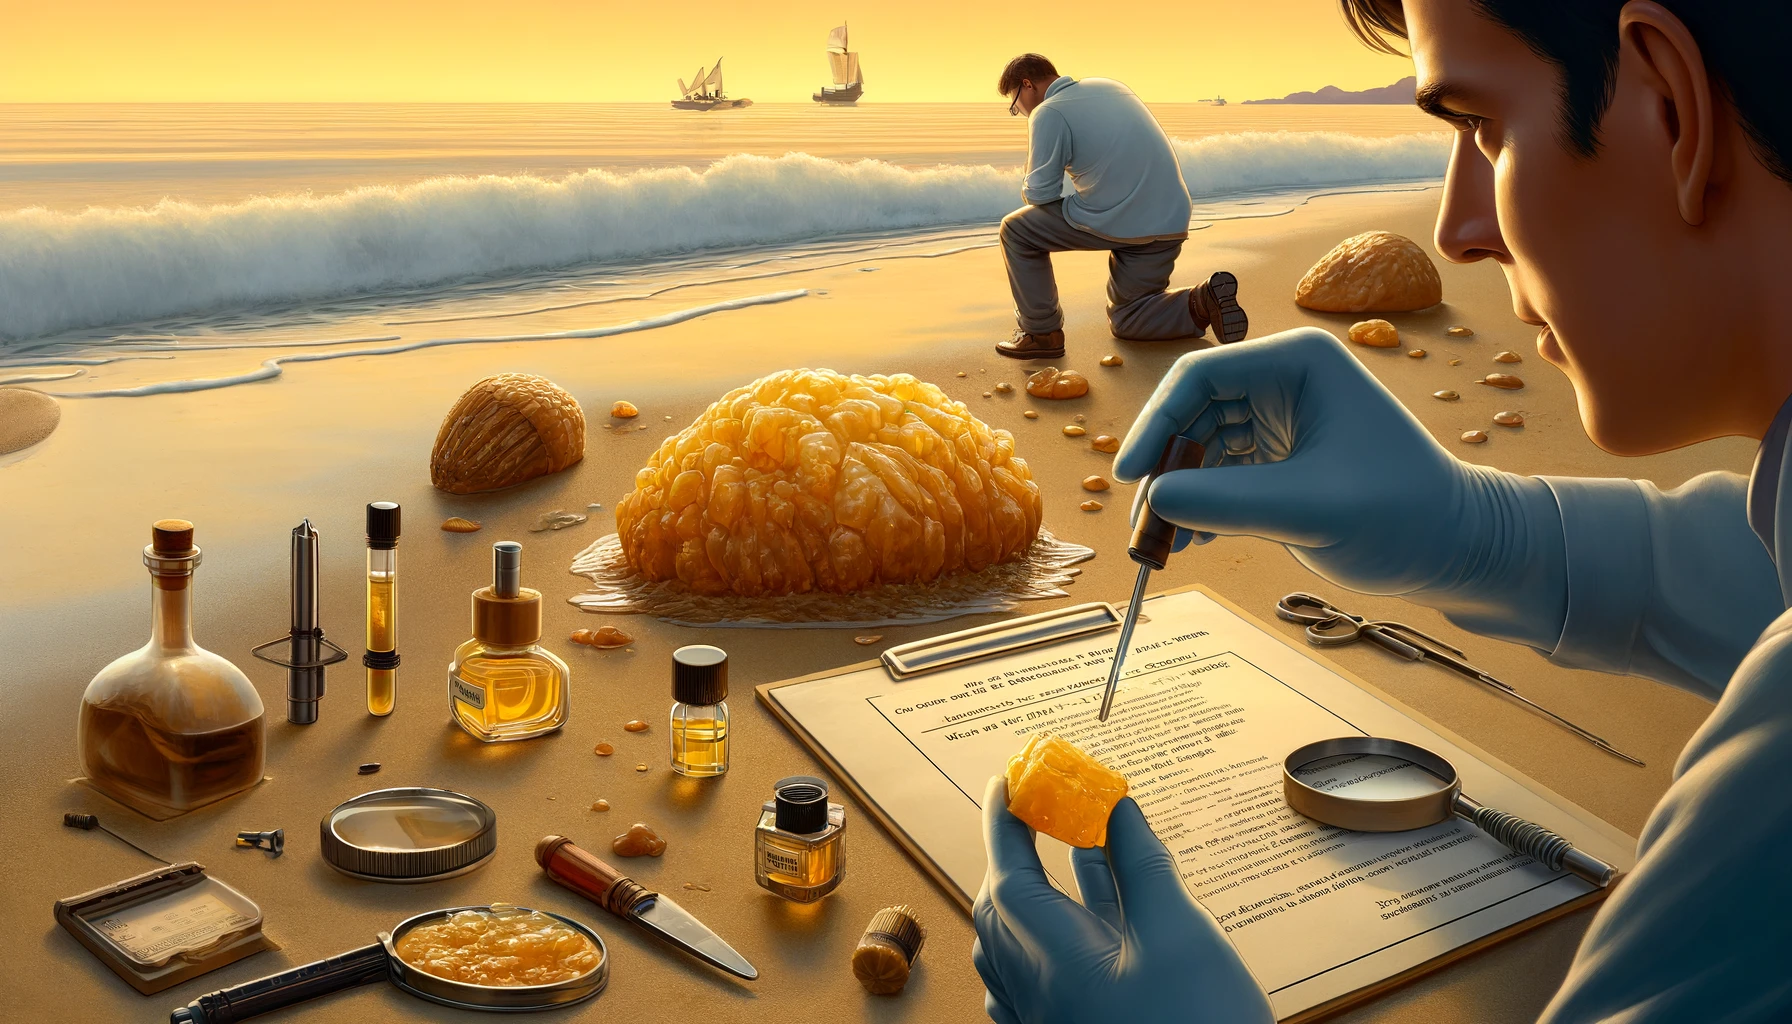 An image illustrating the methods for identifying ambergris, set in a scenario where someone is examining a piece of ambergris washed up on the shore. The scene includes a person equipped with tools such as gloves, a magnifying glass, and perhaps a reference book, analyzing the texture, color, and shape of the suspected ambergris. The ambergris is depicted as a waxy, lump-like object on the sand, with the individual assessing its authenticity by performing various tests, like the hot needle test, where a heated needle is applied to the ambergris to observe its melting behavior and scent. The background is a calm beach setting, emphasizing the discovery and investigation process of this rare and valuable substance.